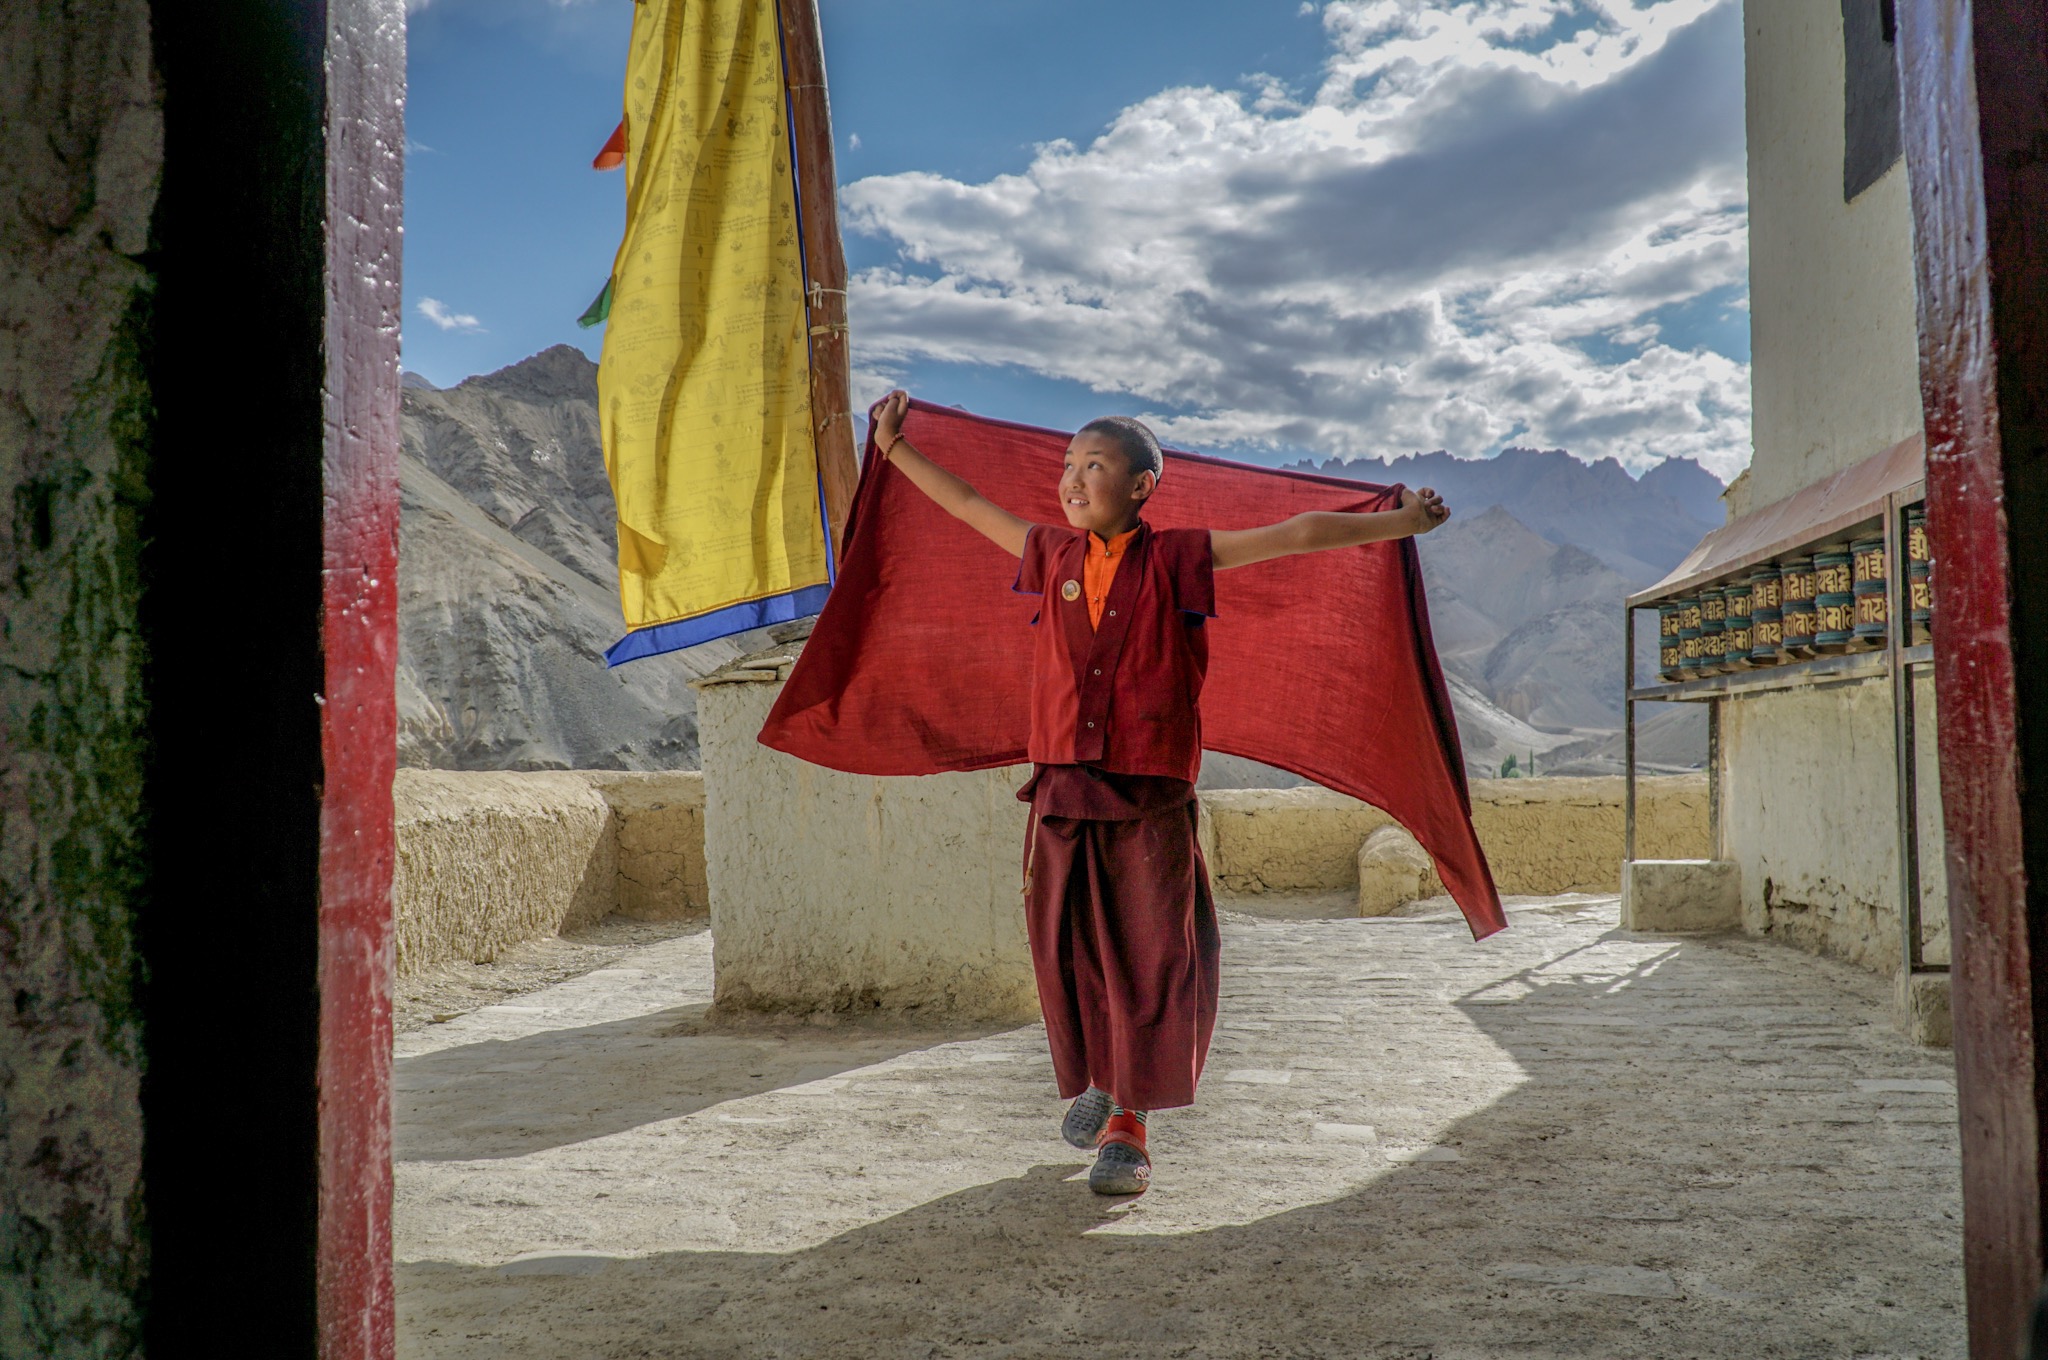 With the Himalayas in the background, this novice monk spreads out his arms.